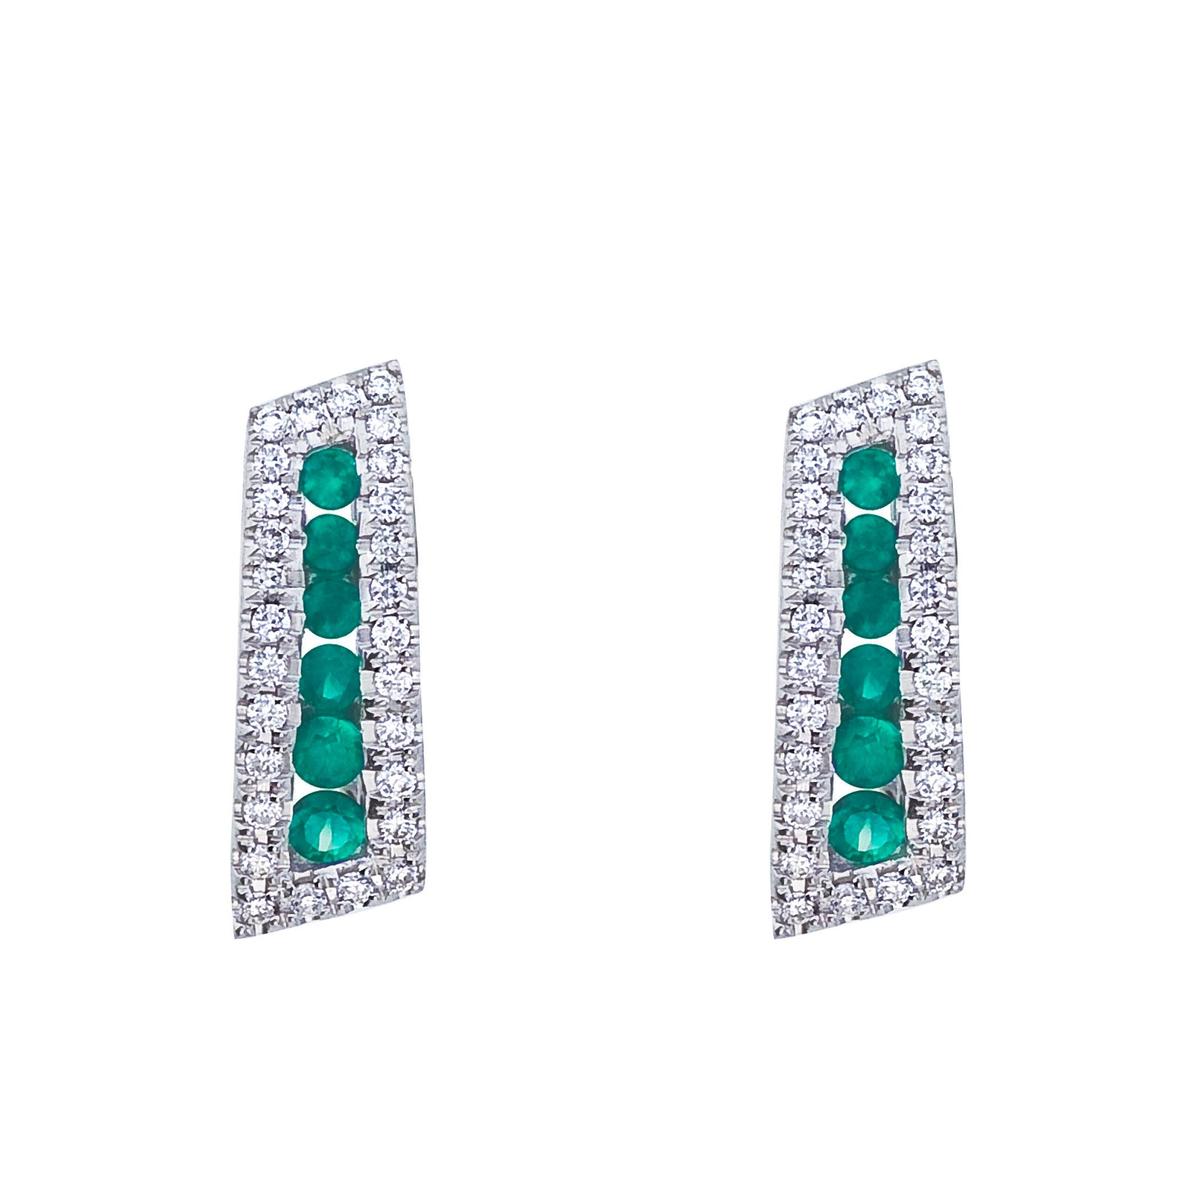 Certified 14k White Gold Emerald and Diamond Euro Back Earring 0.46 CTW